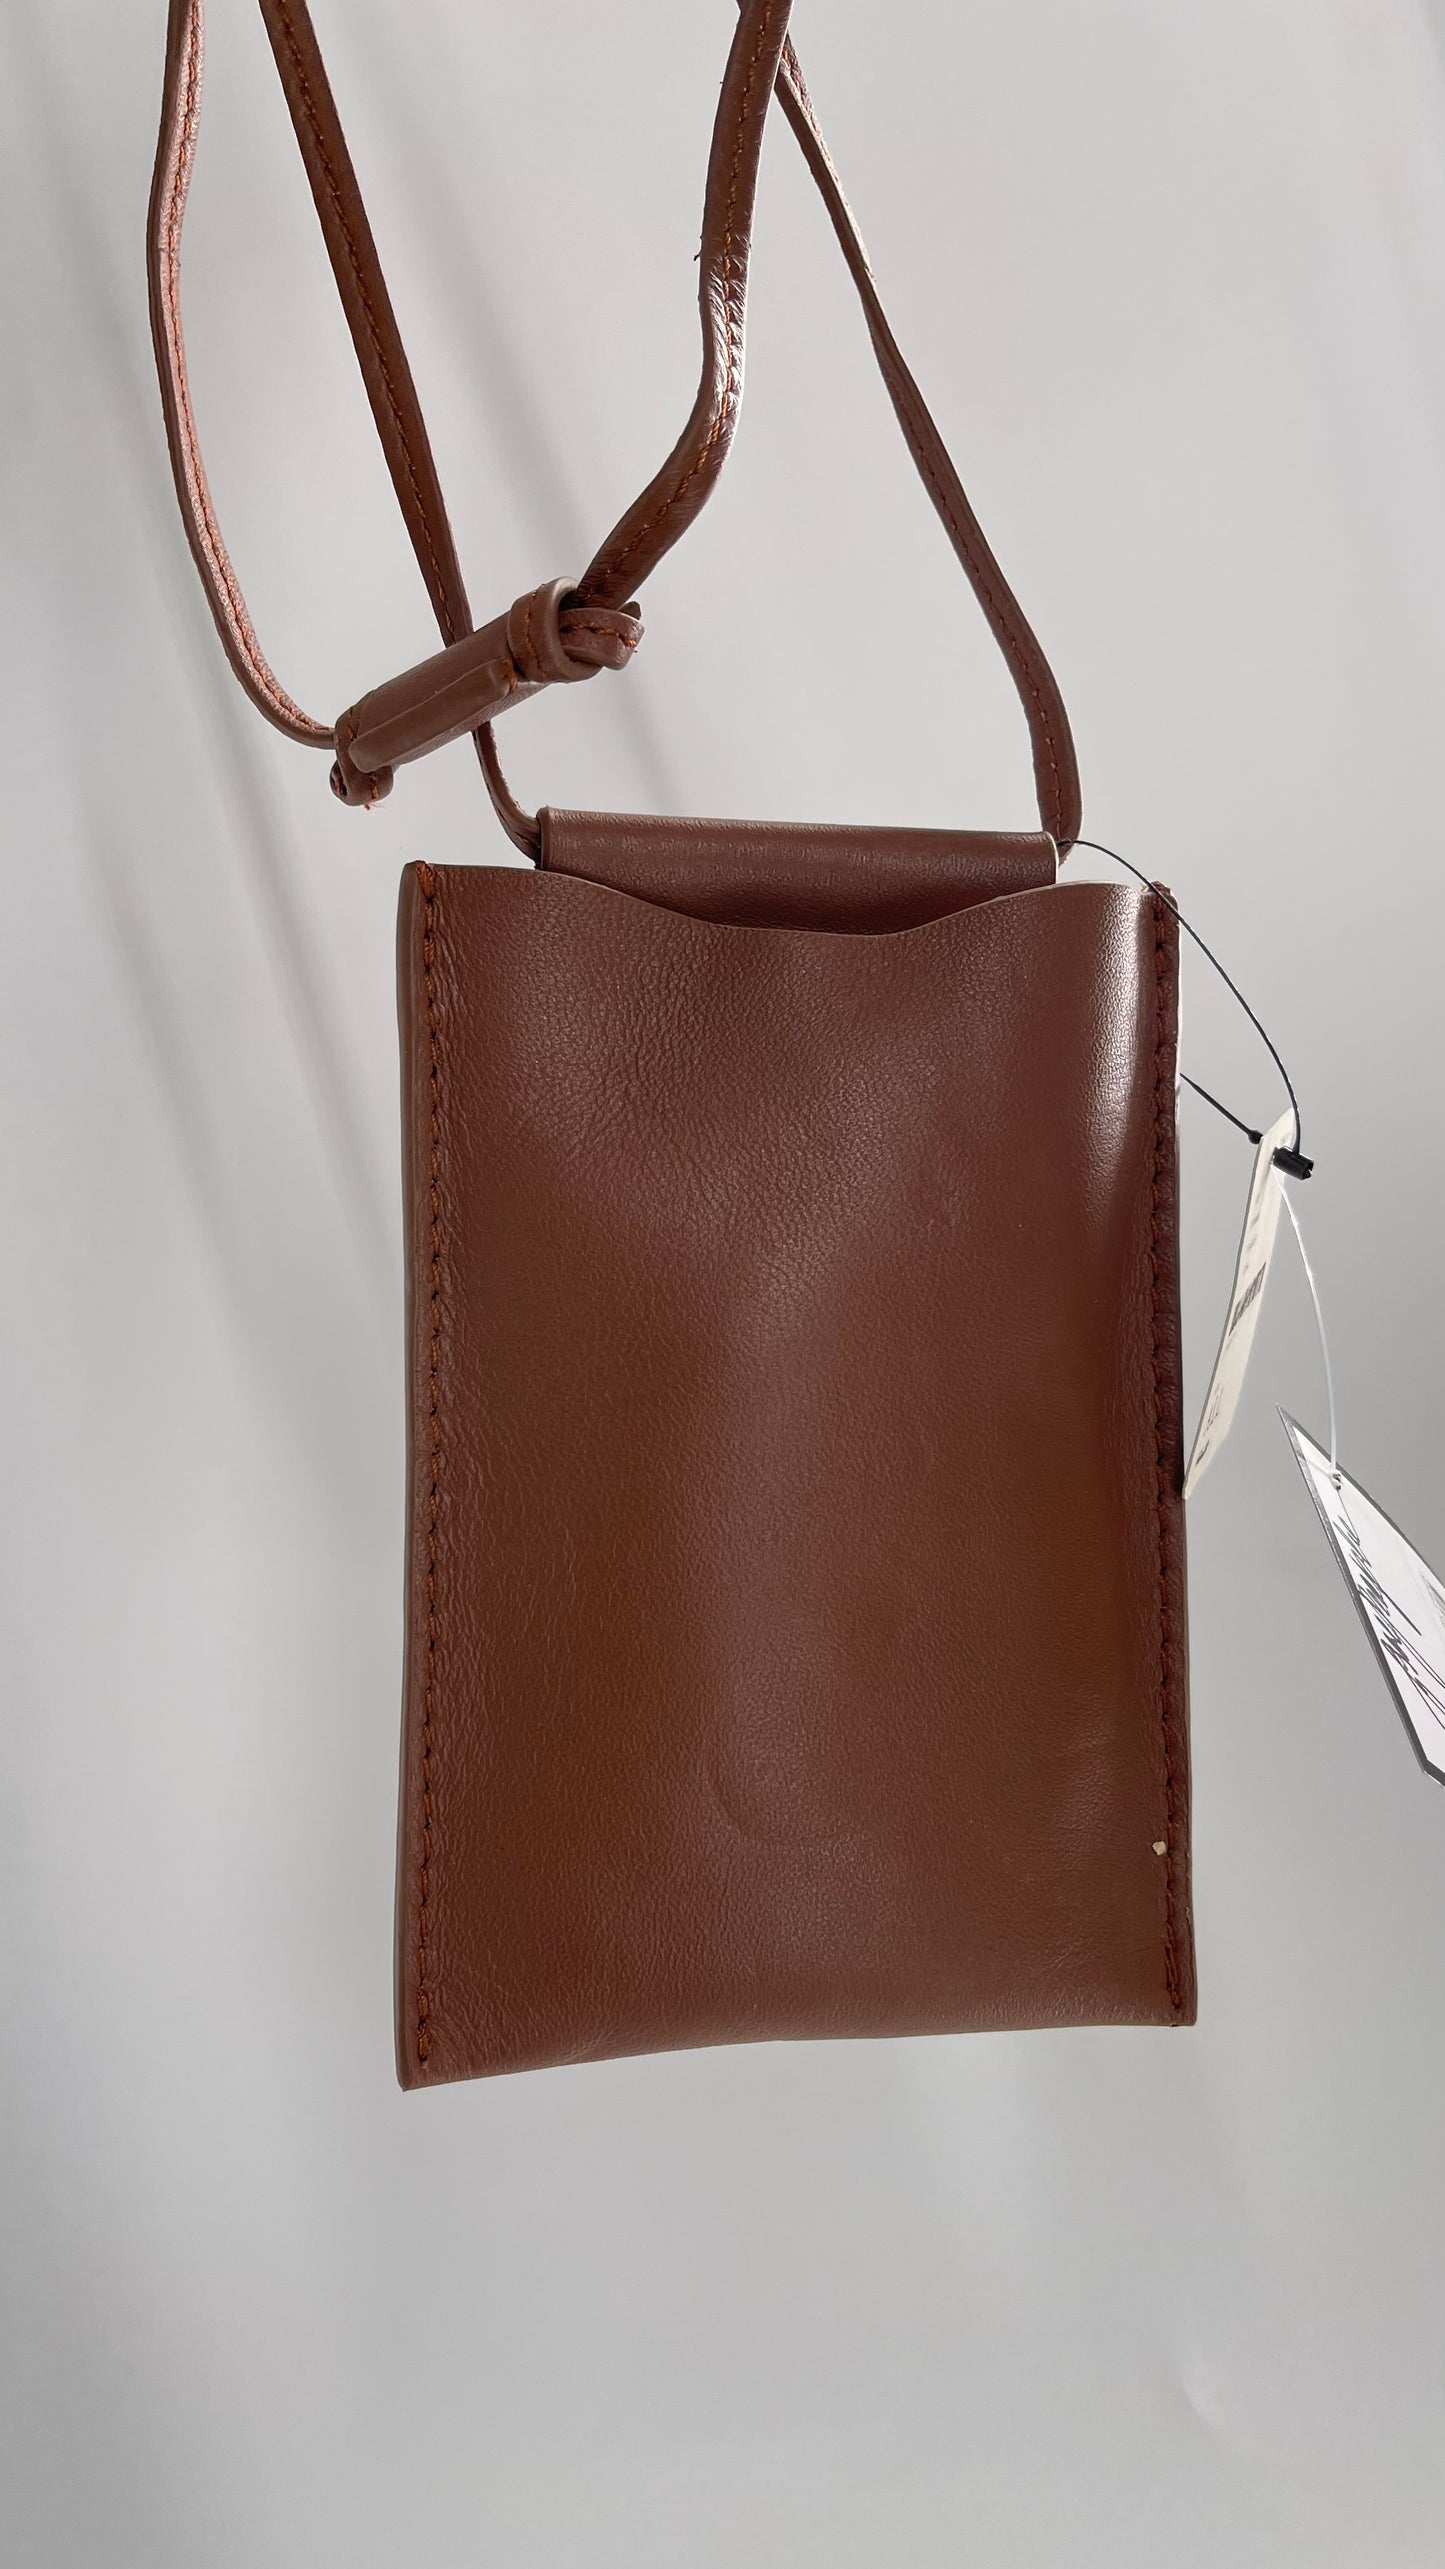 Free People Brown Leather Crossbody Phone Pouch with Tags Attached